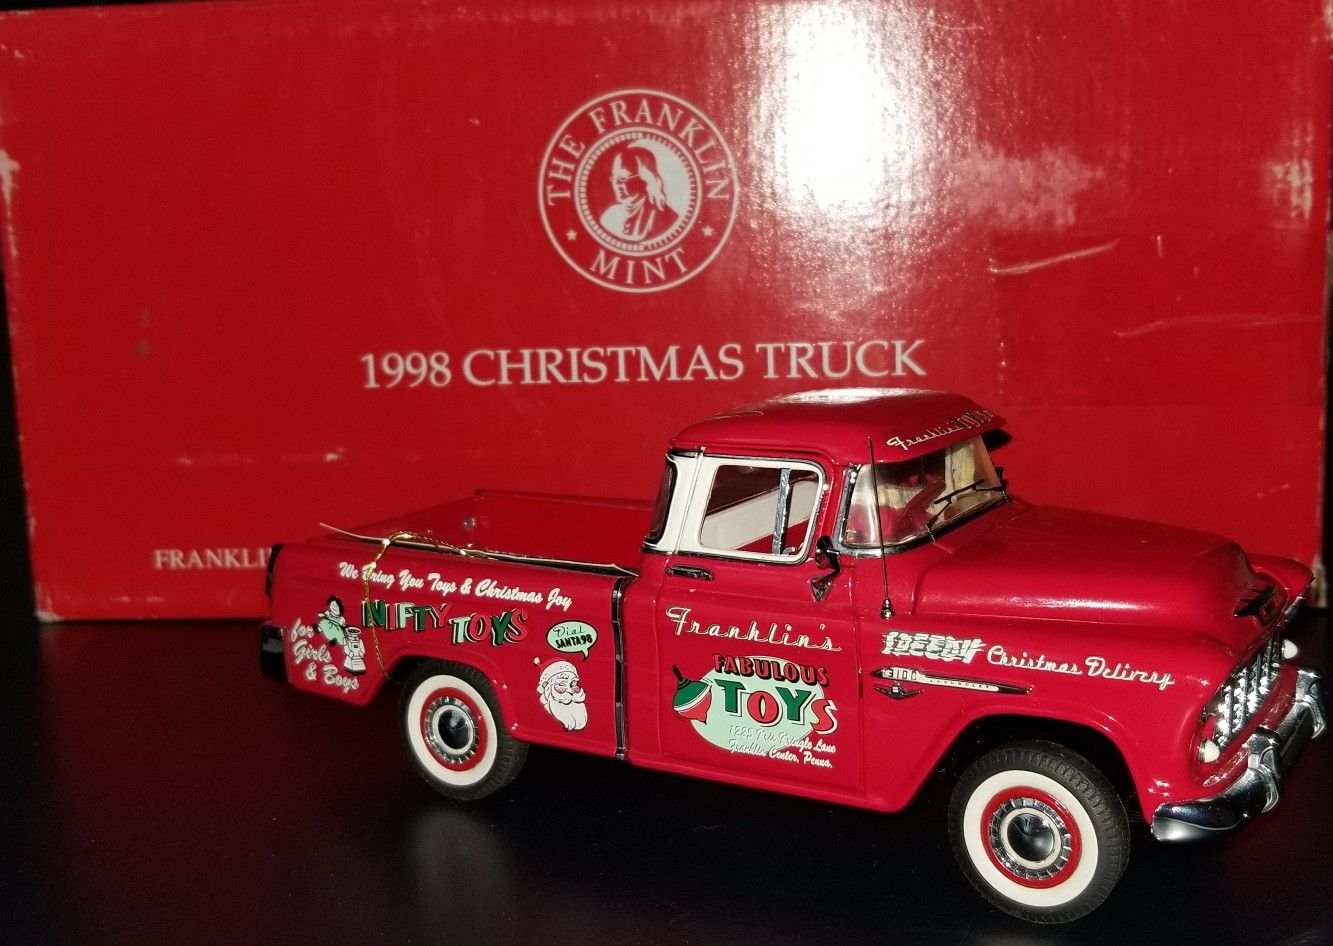 The Franklin Mint "1998 Christmas Truck "